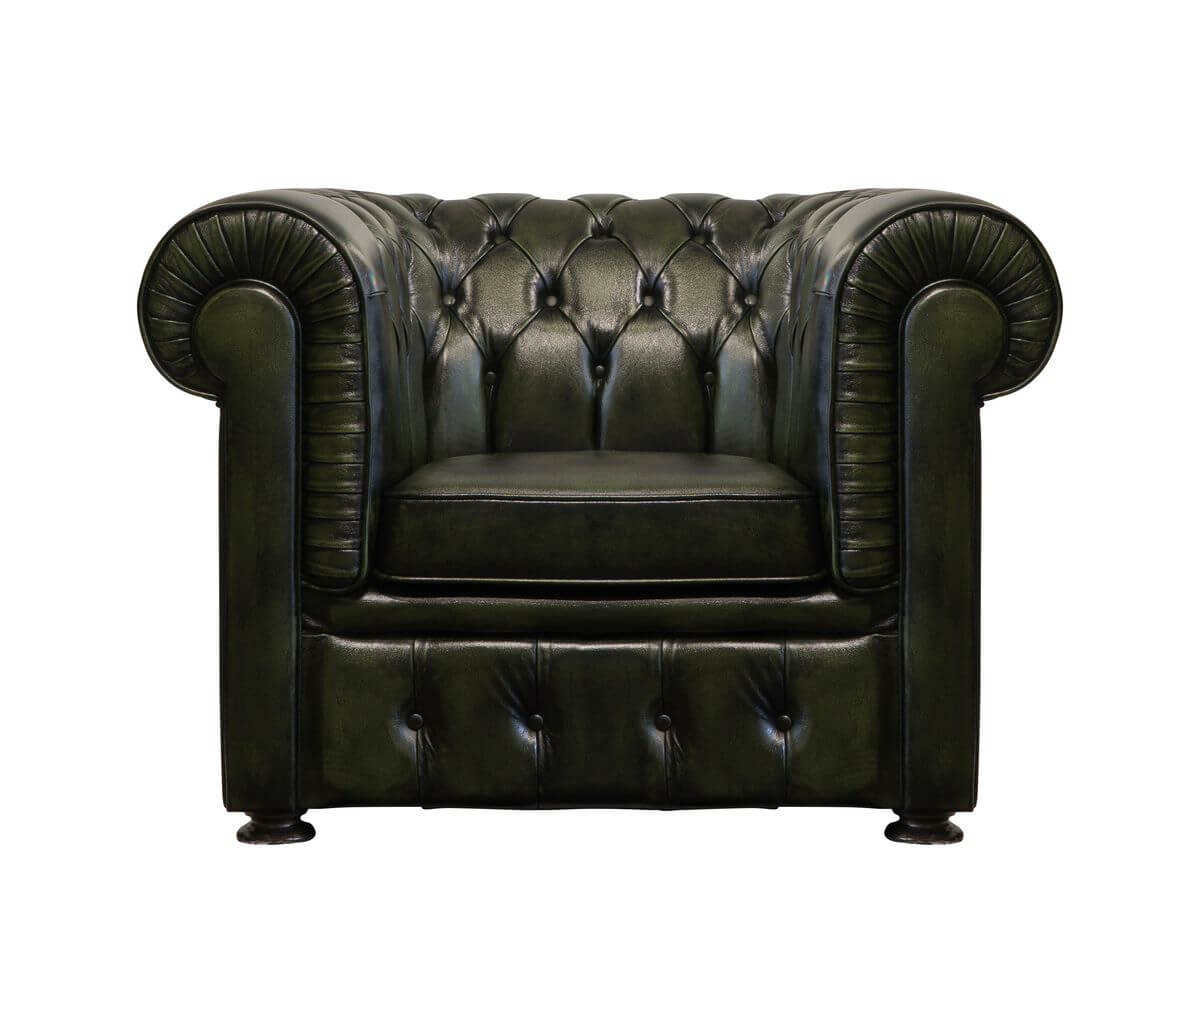 Classic chesterfield zold fotel